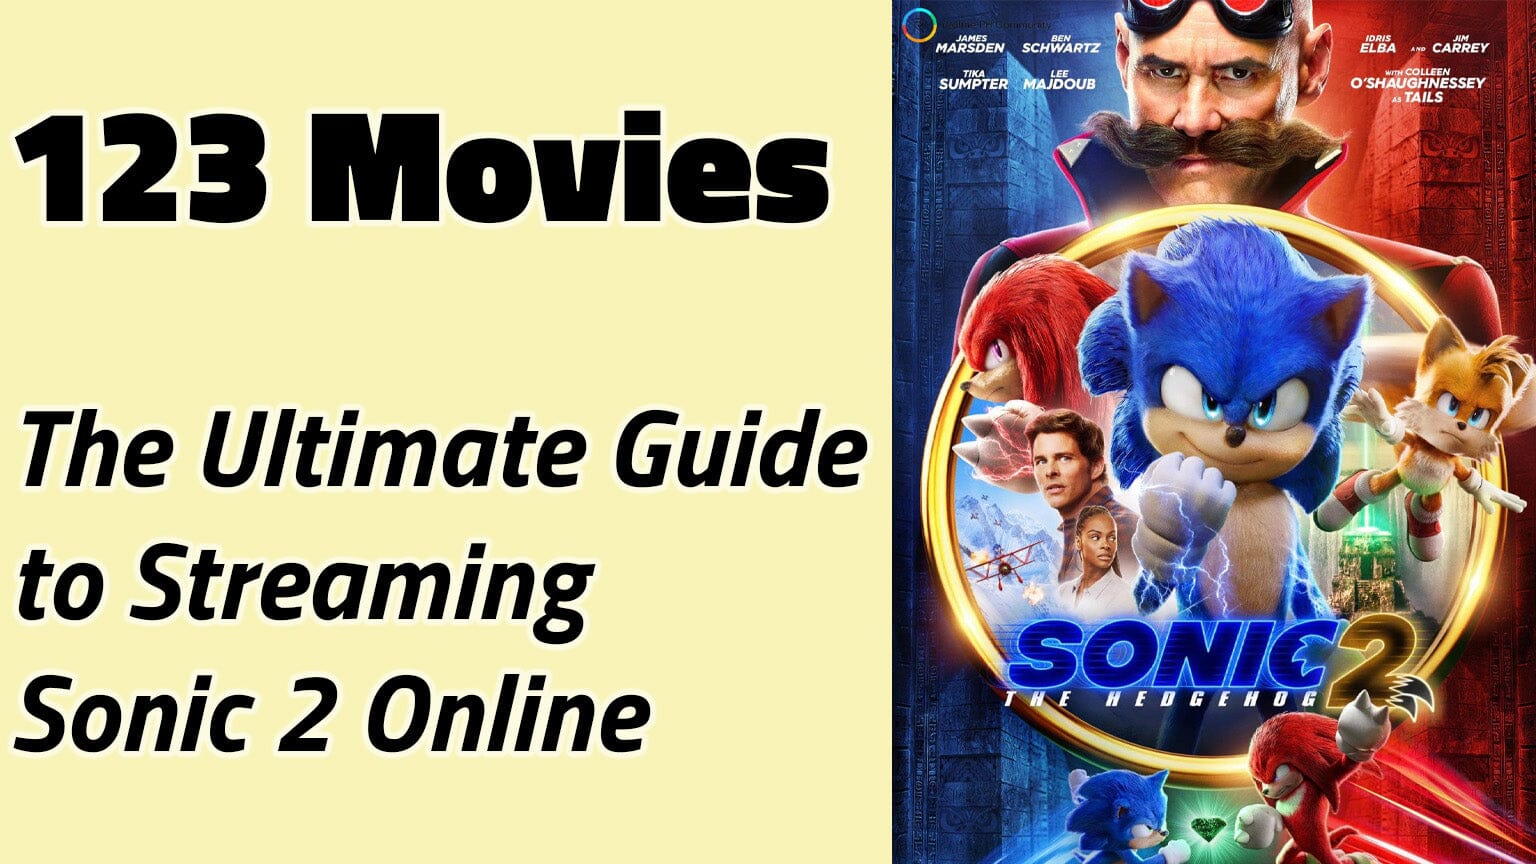 123 Movies: The Ultimate Guide to Streaming Sonic 2 Online